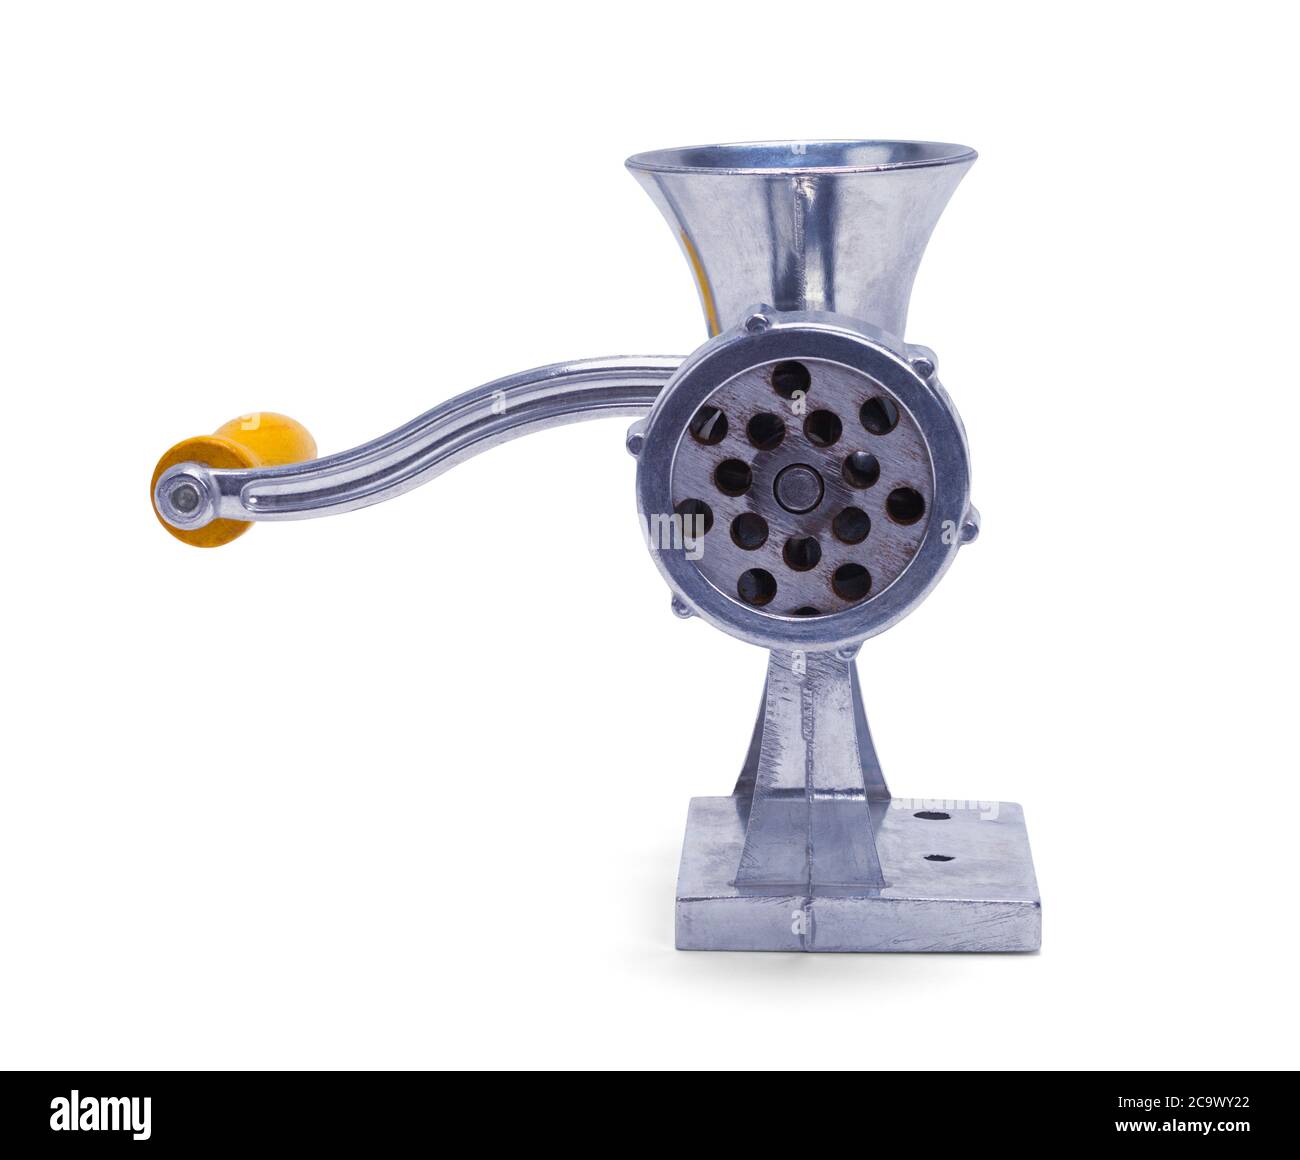 https://c8.alamy.com/comp/2C9WY22/metal-meat-grinder-with-wood-handle-front-view-isolated-on-white-2C9WY22.jpg